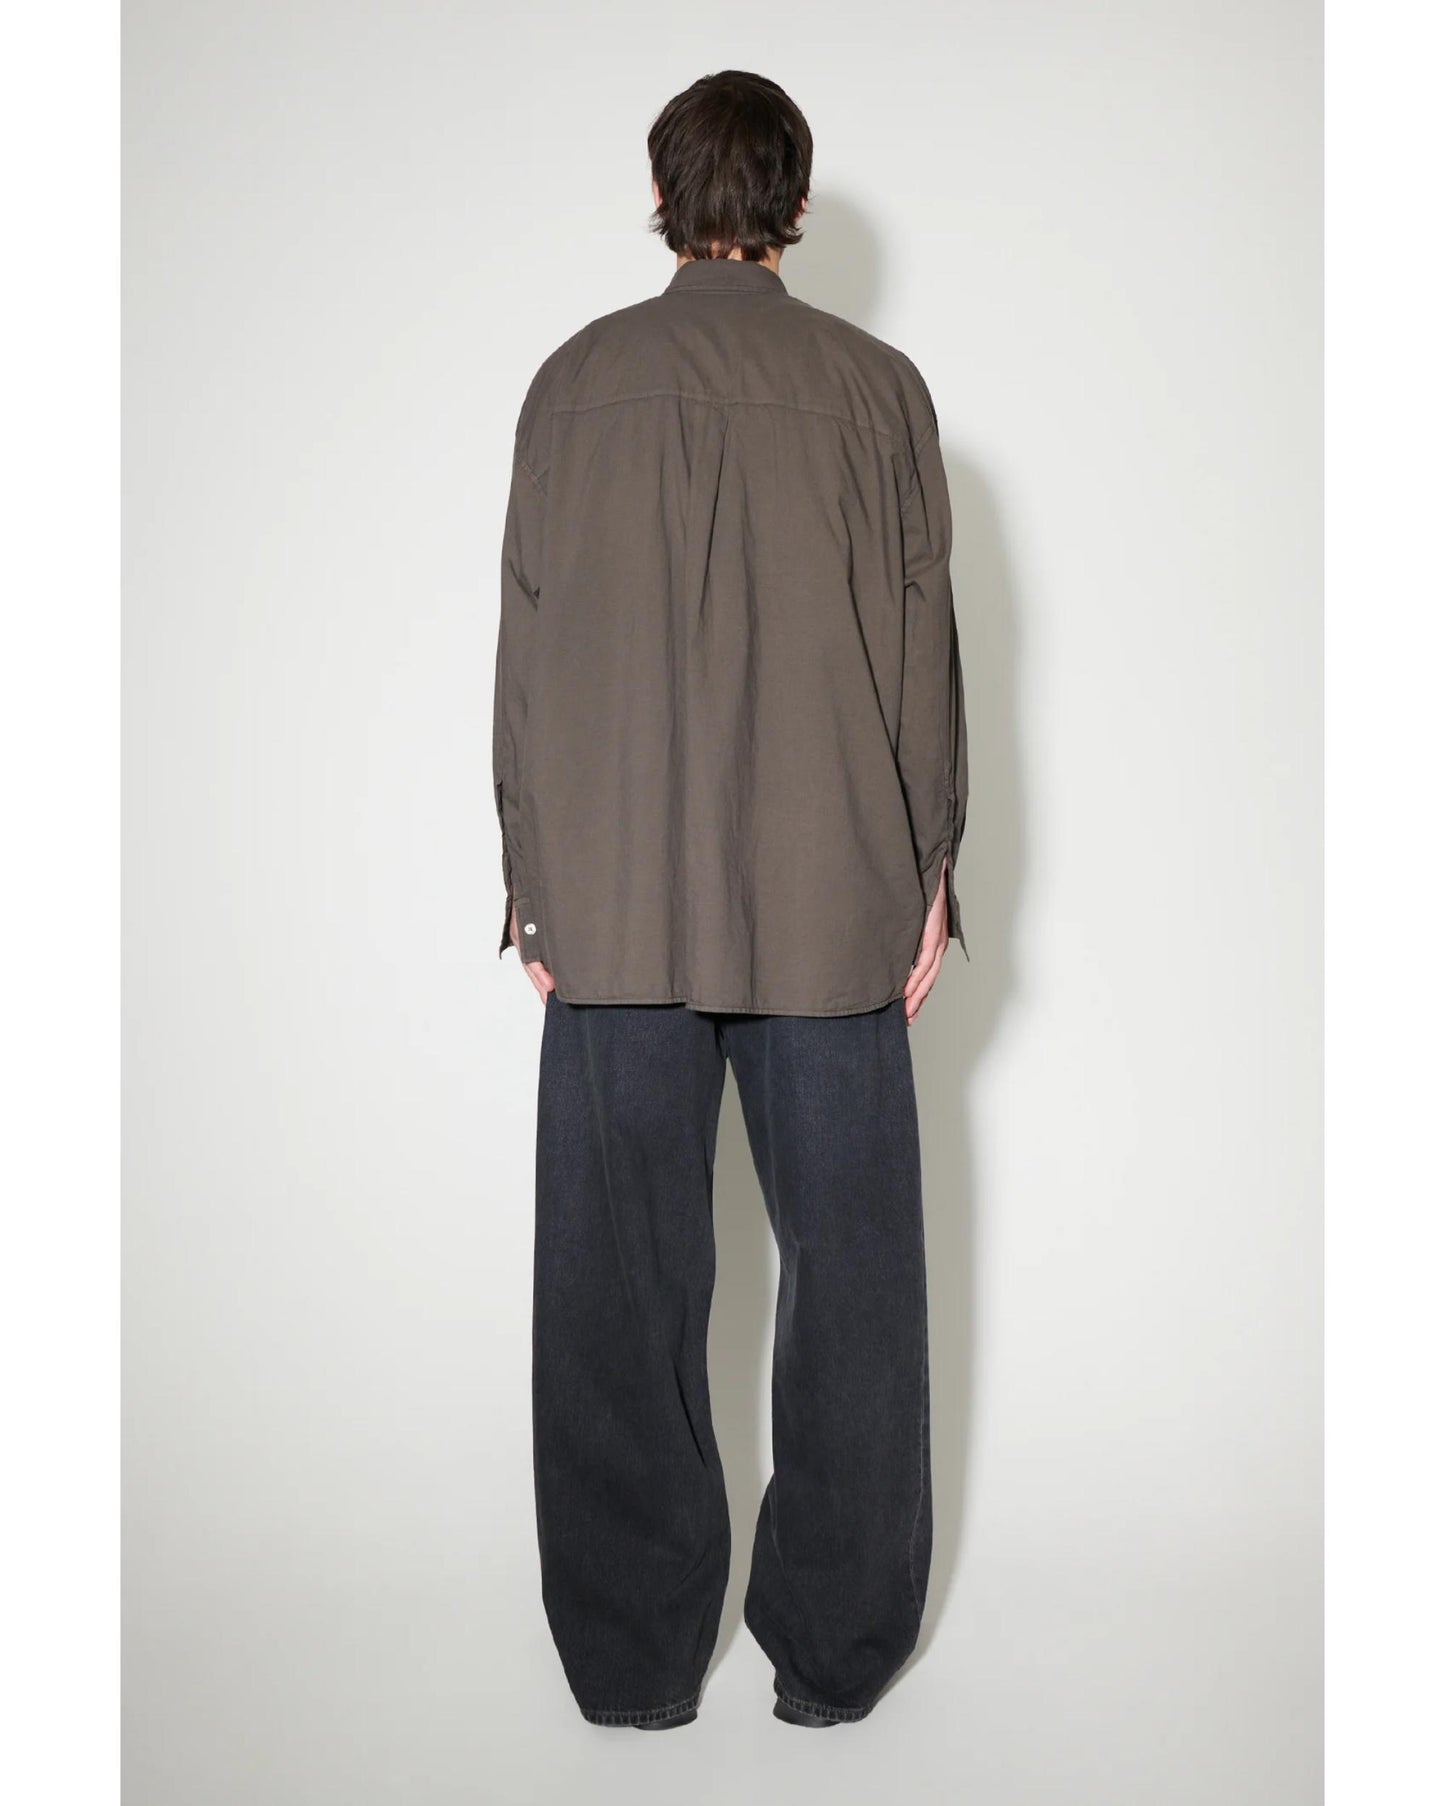 BORROWED BD SHIRT Faded Brown Cotton Voile